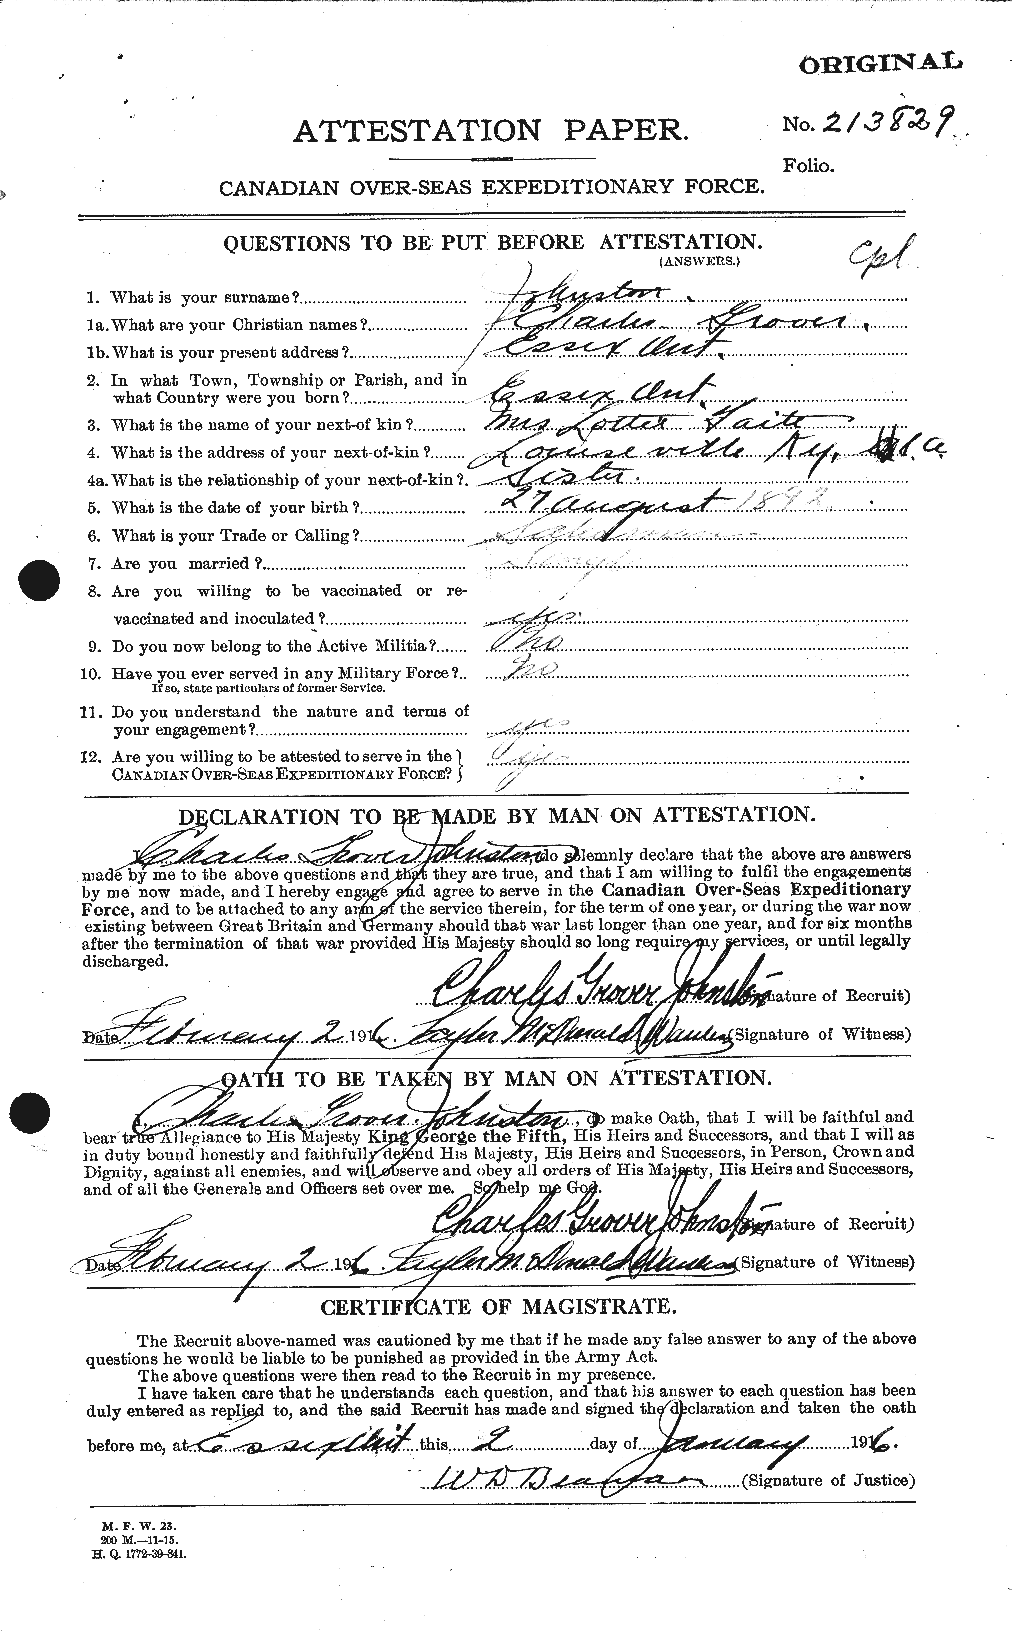 Personnel Records of the First World War - CEF 423107a